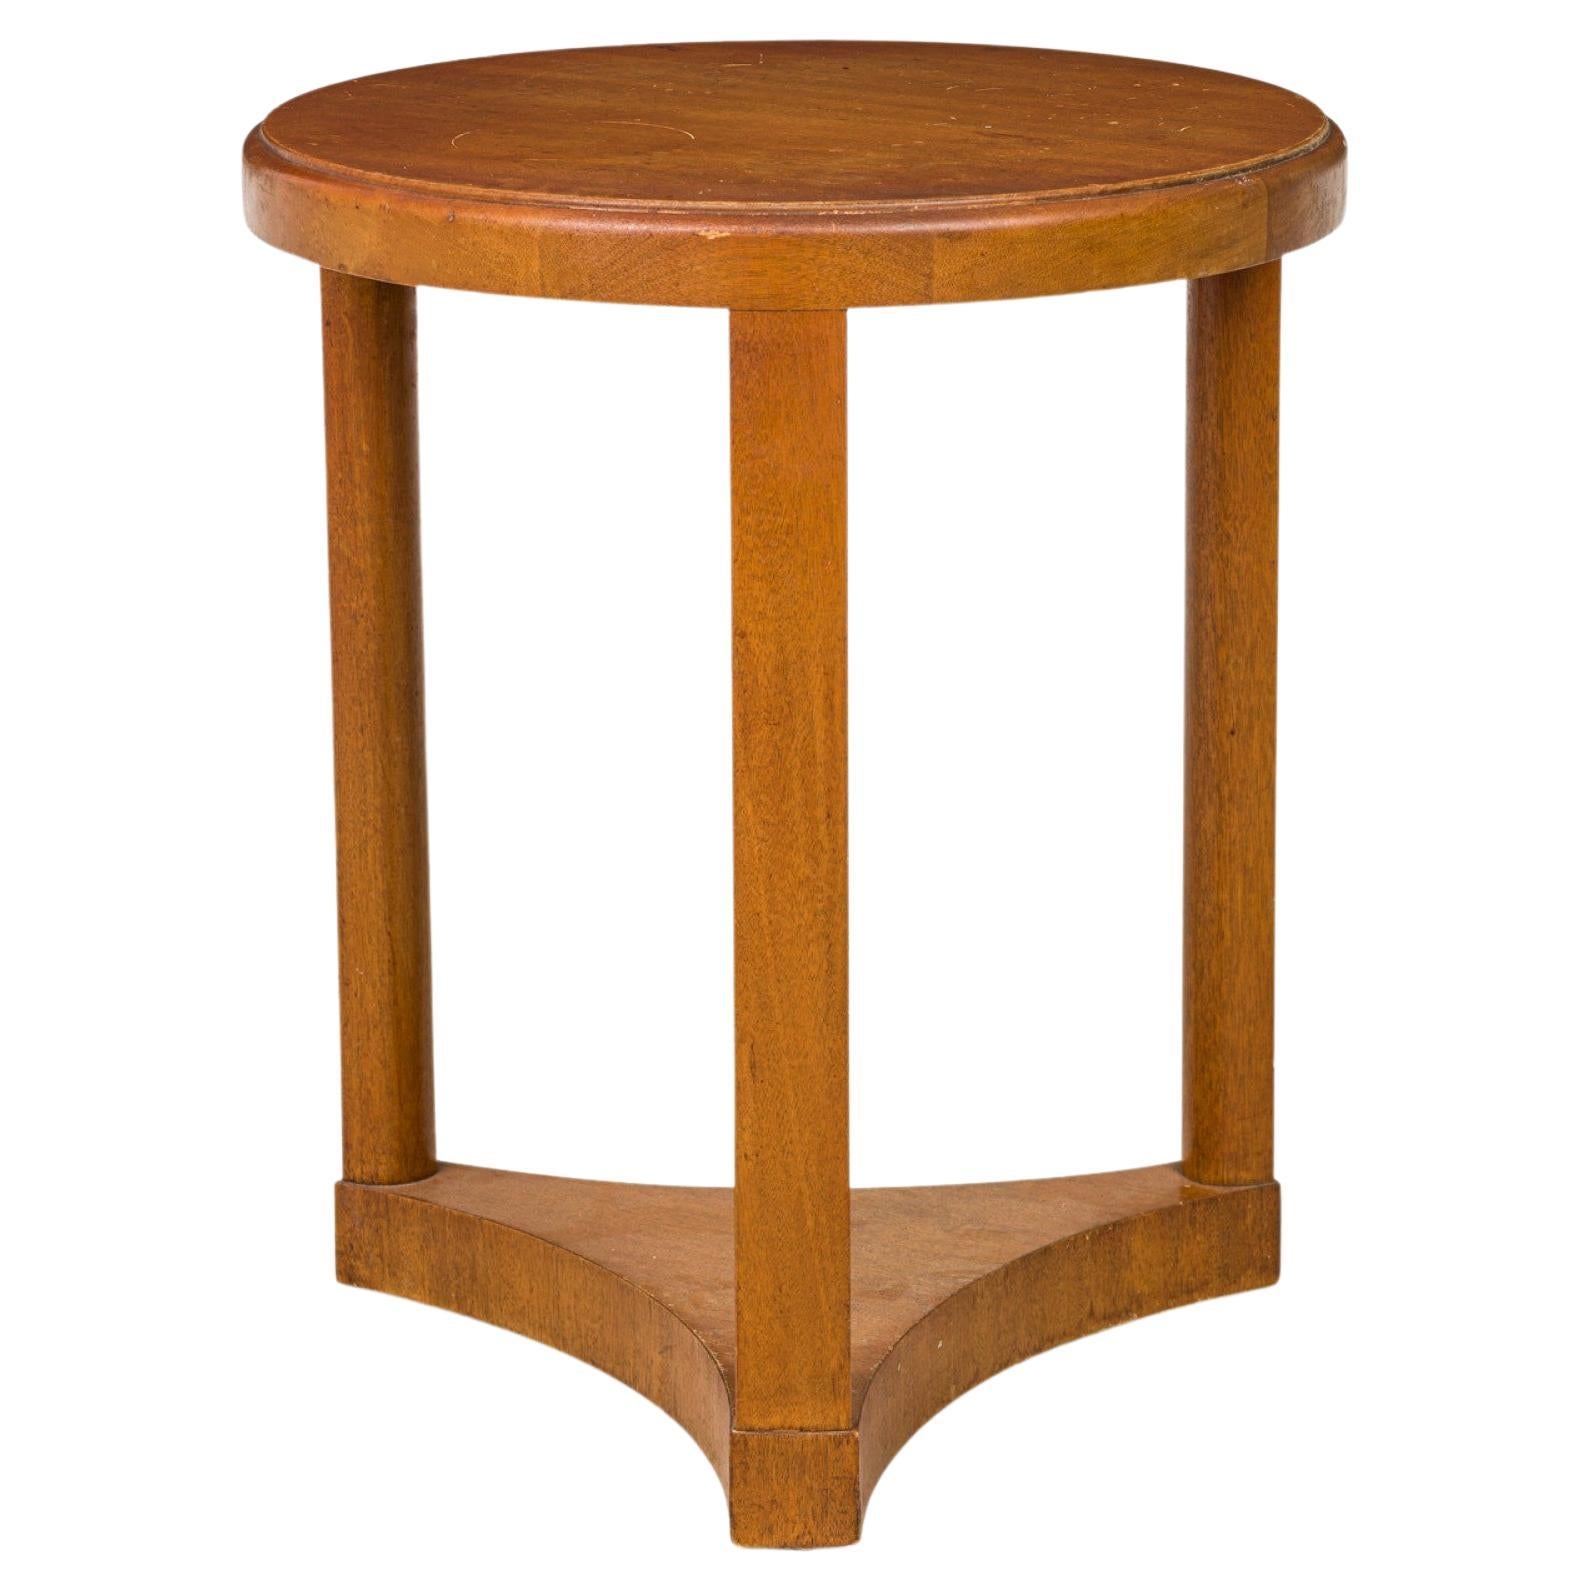 Edward Wormley American Mid-Century Tall Round Wooden End / Side Table